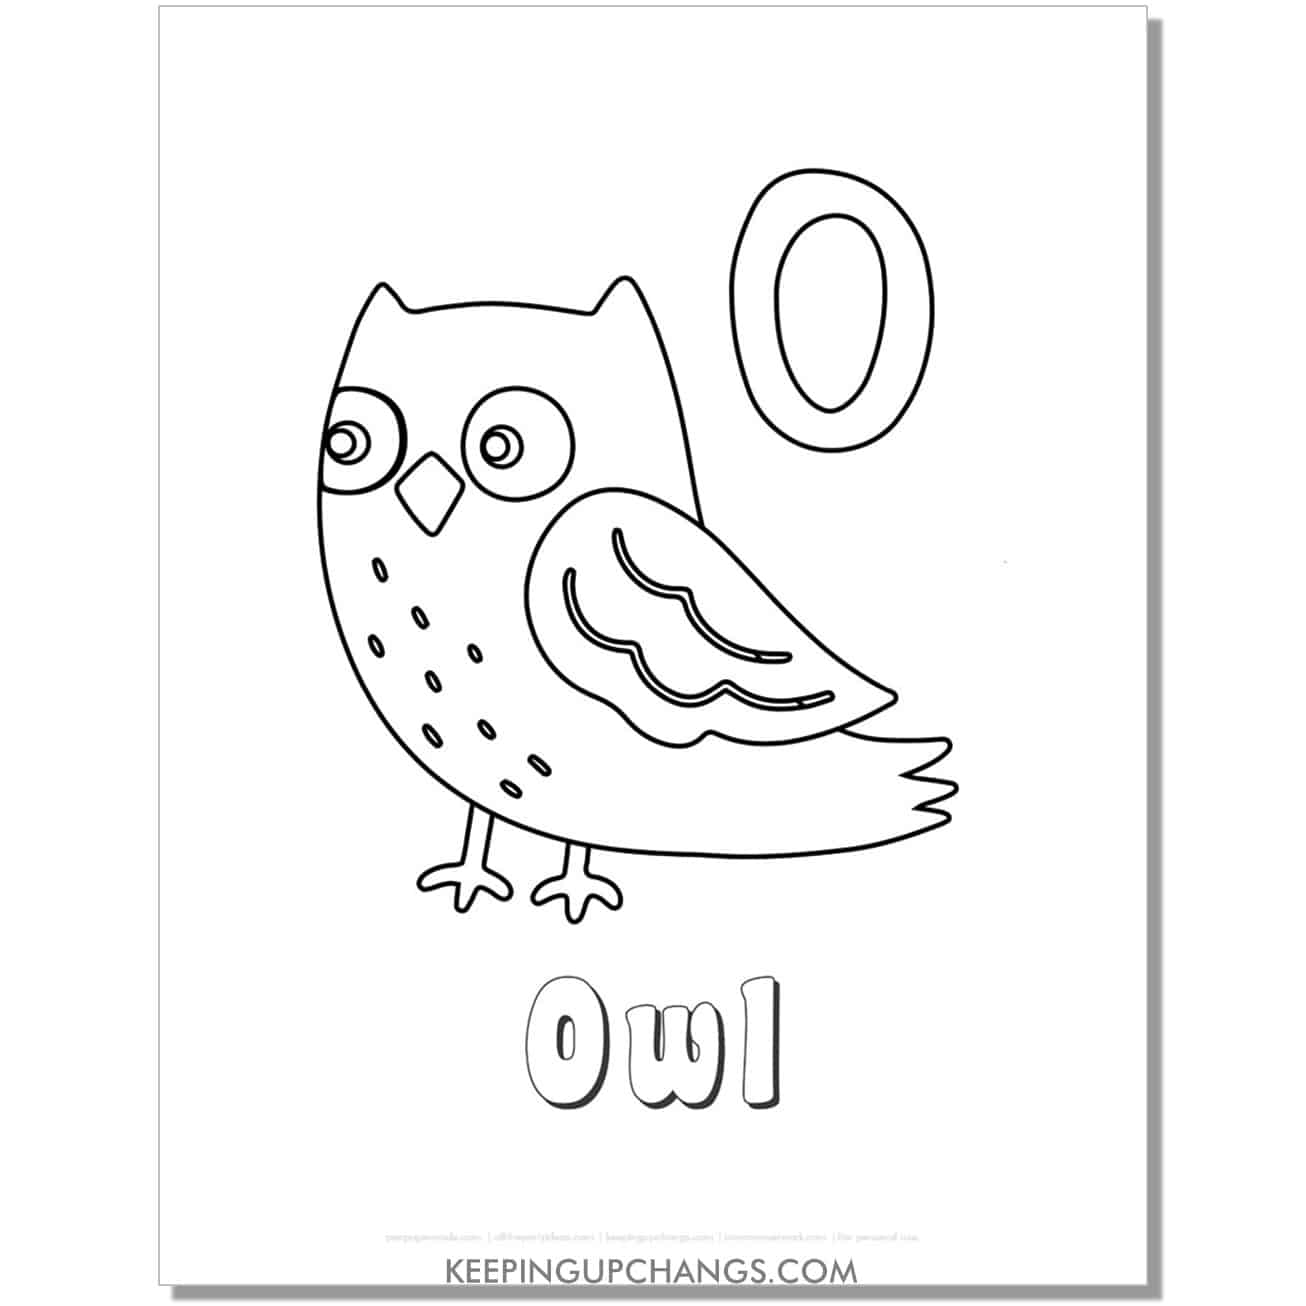 fun abc o coloring page with owl hand drawing.